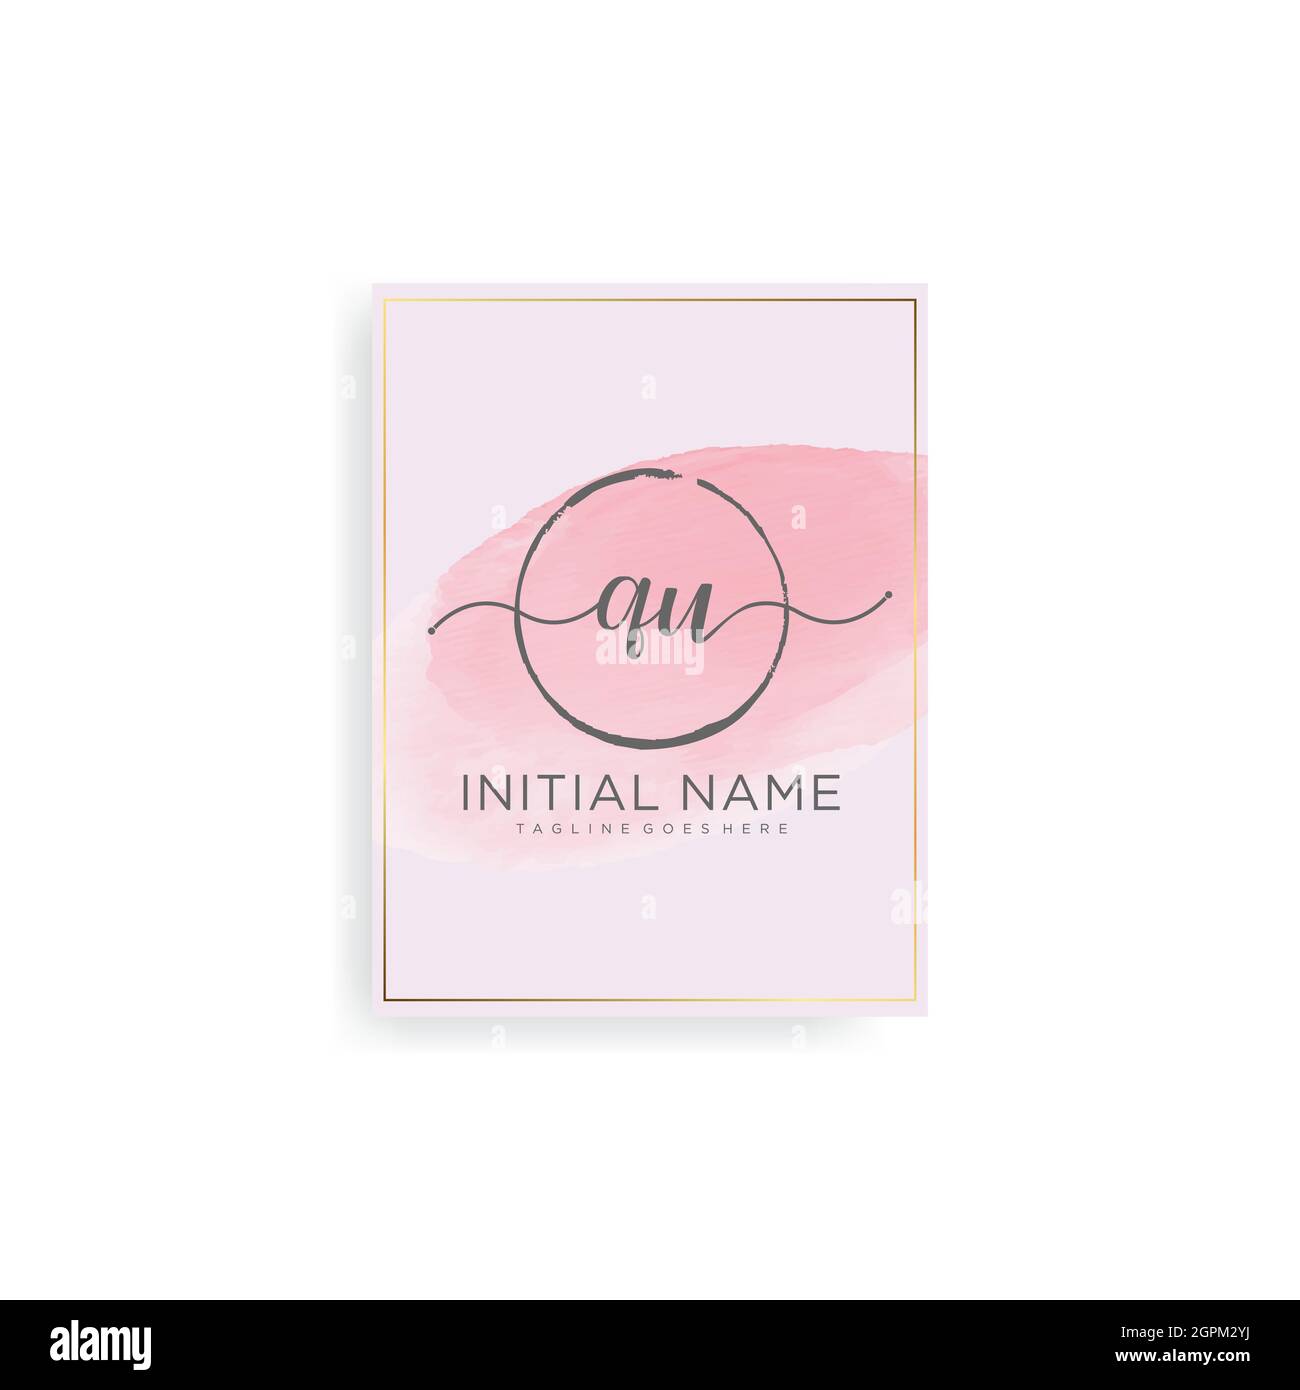 Letter Initial with Royal Template.elegant with crown logo vector ...